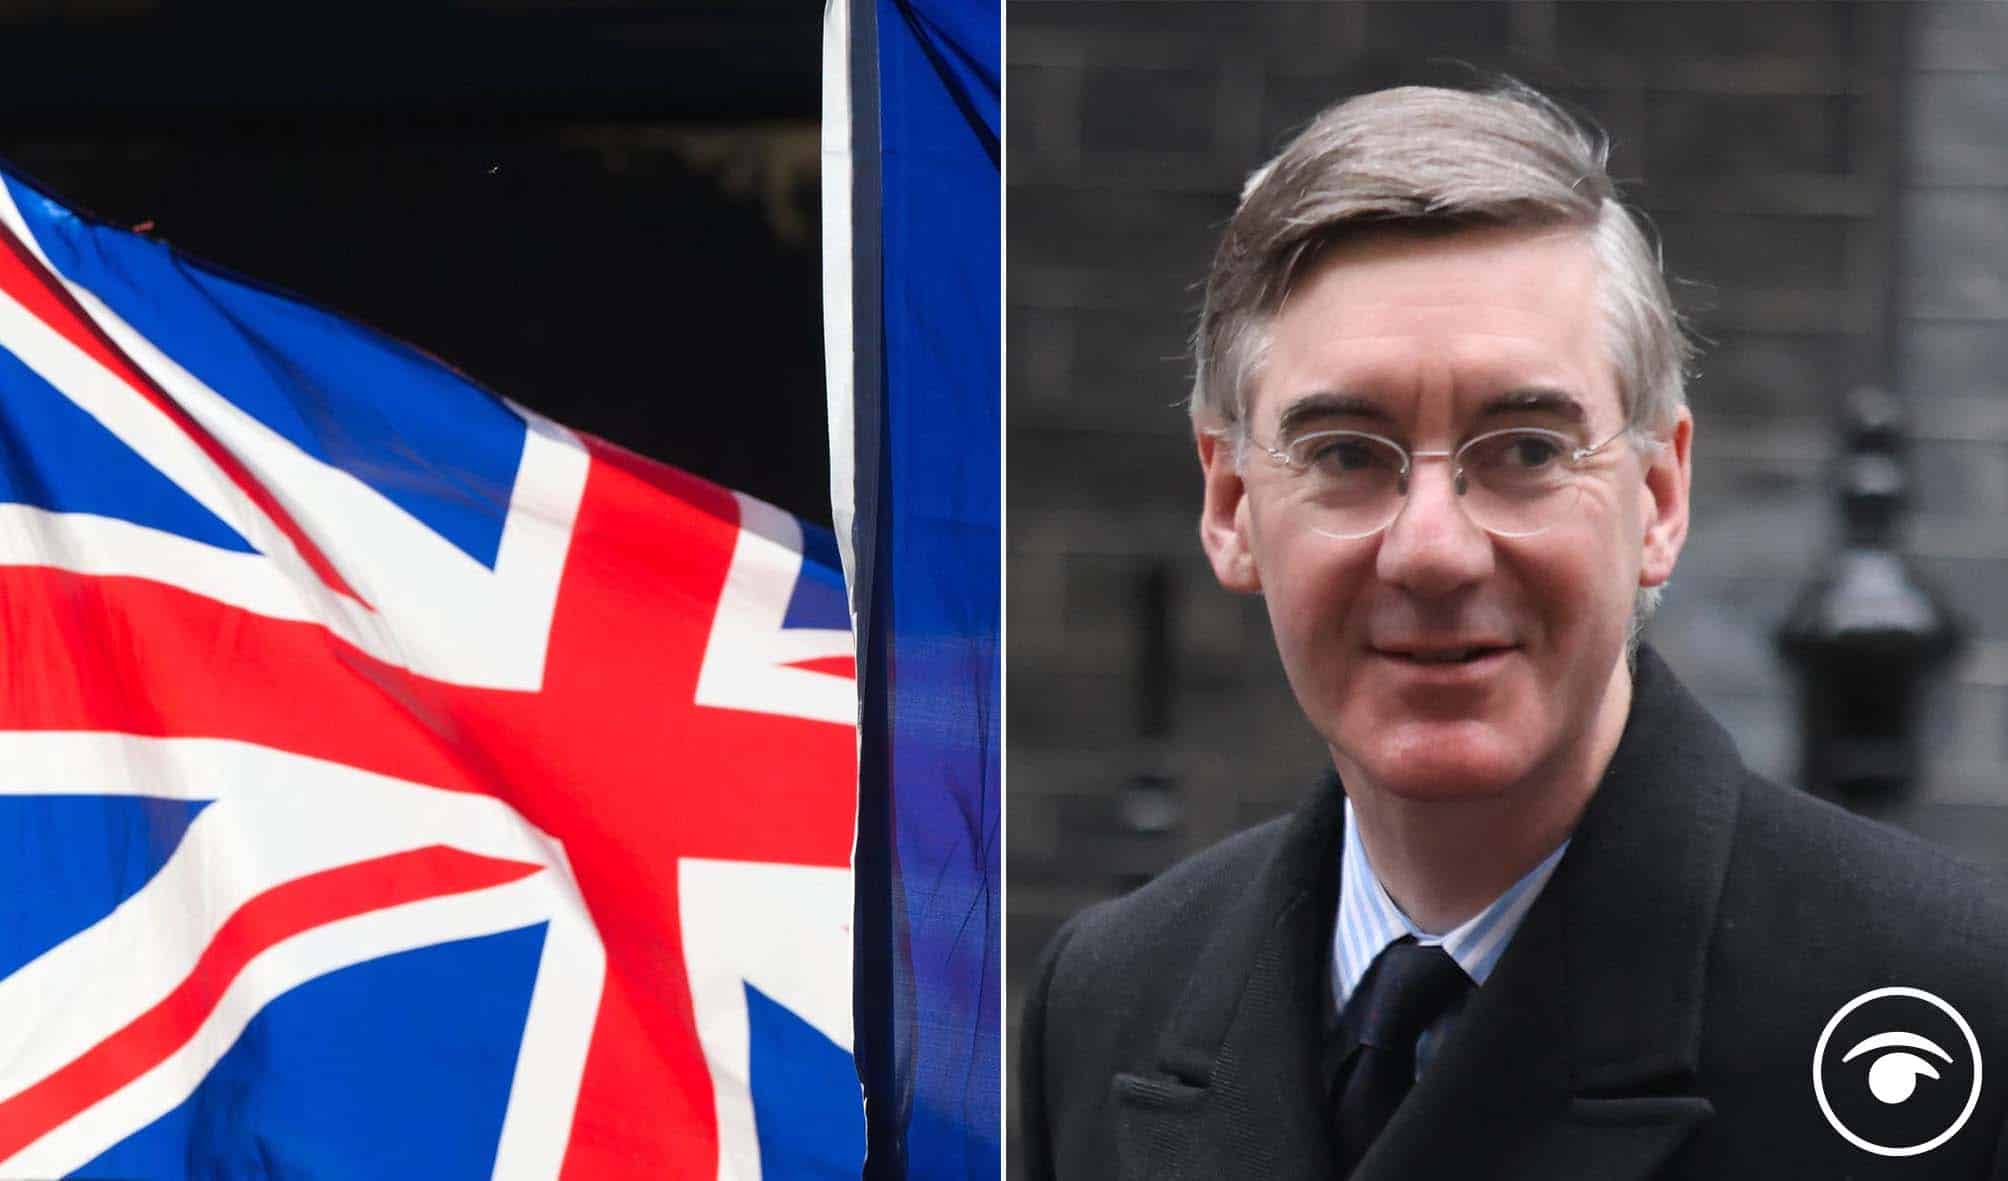 ‘They really do think we are thick’ – Video slams another MP repeating Rees-Mogg’s ‘lies’